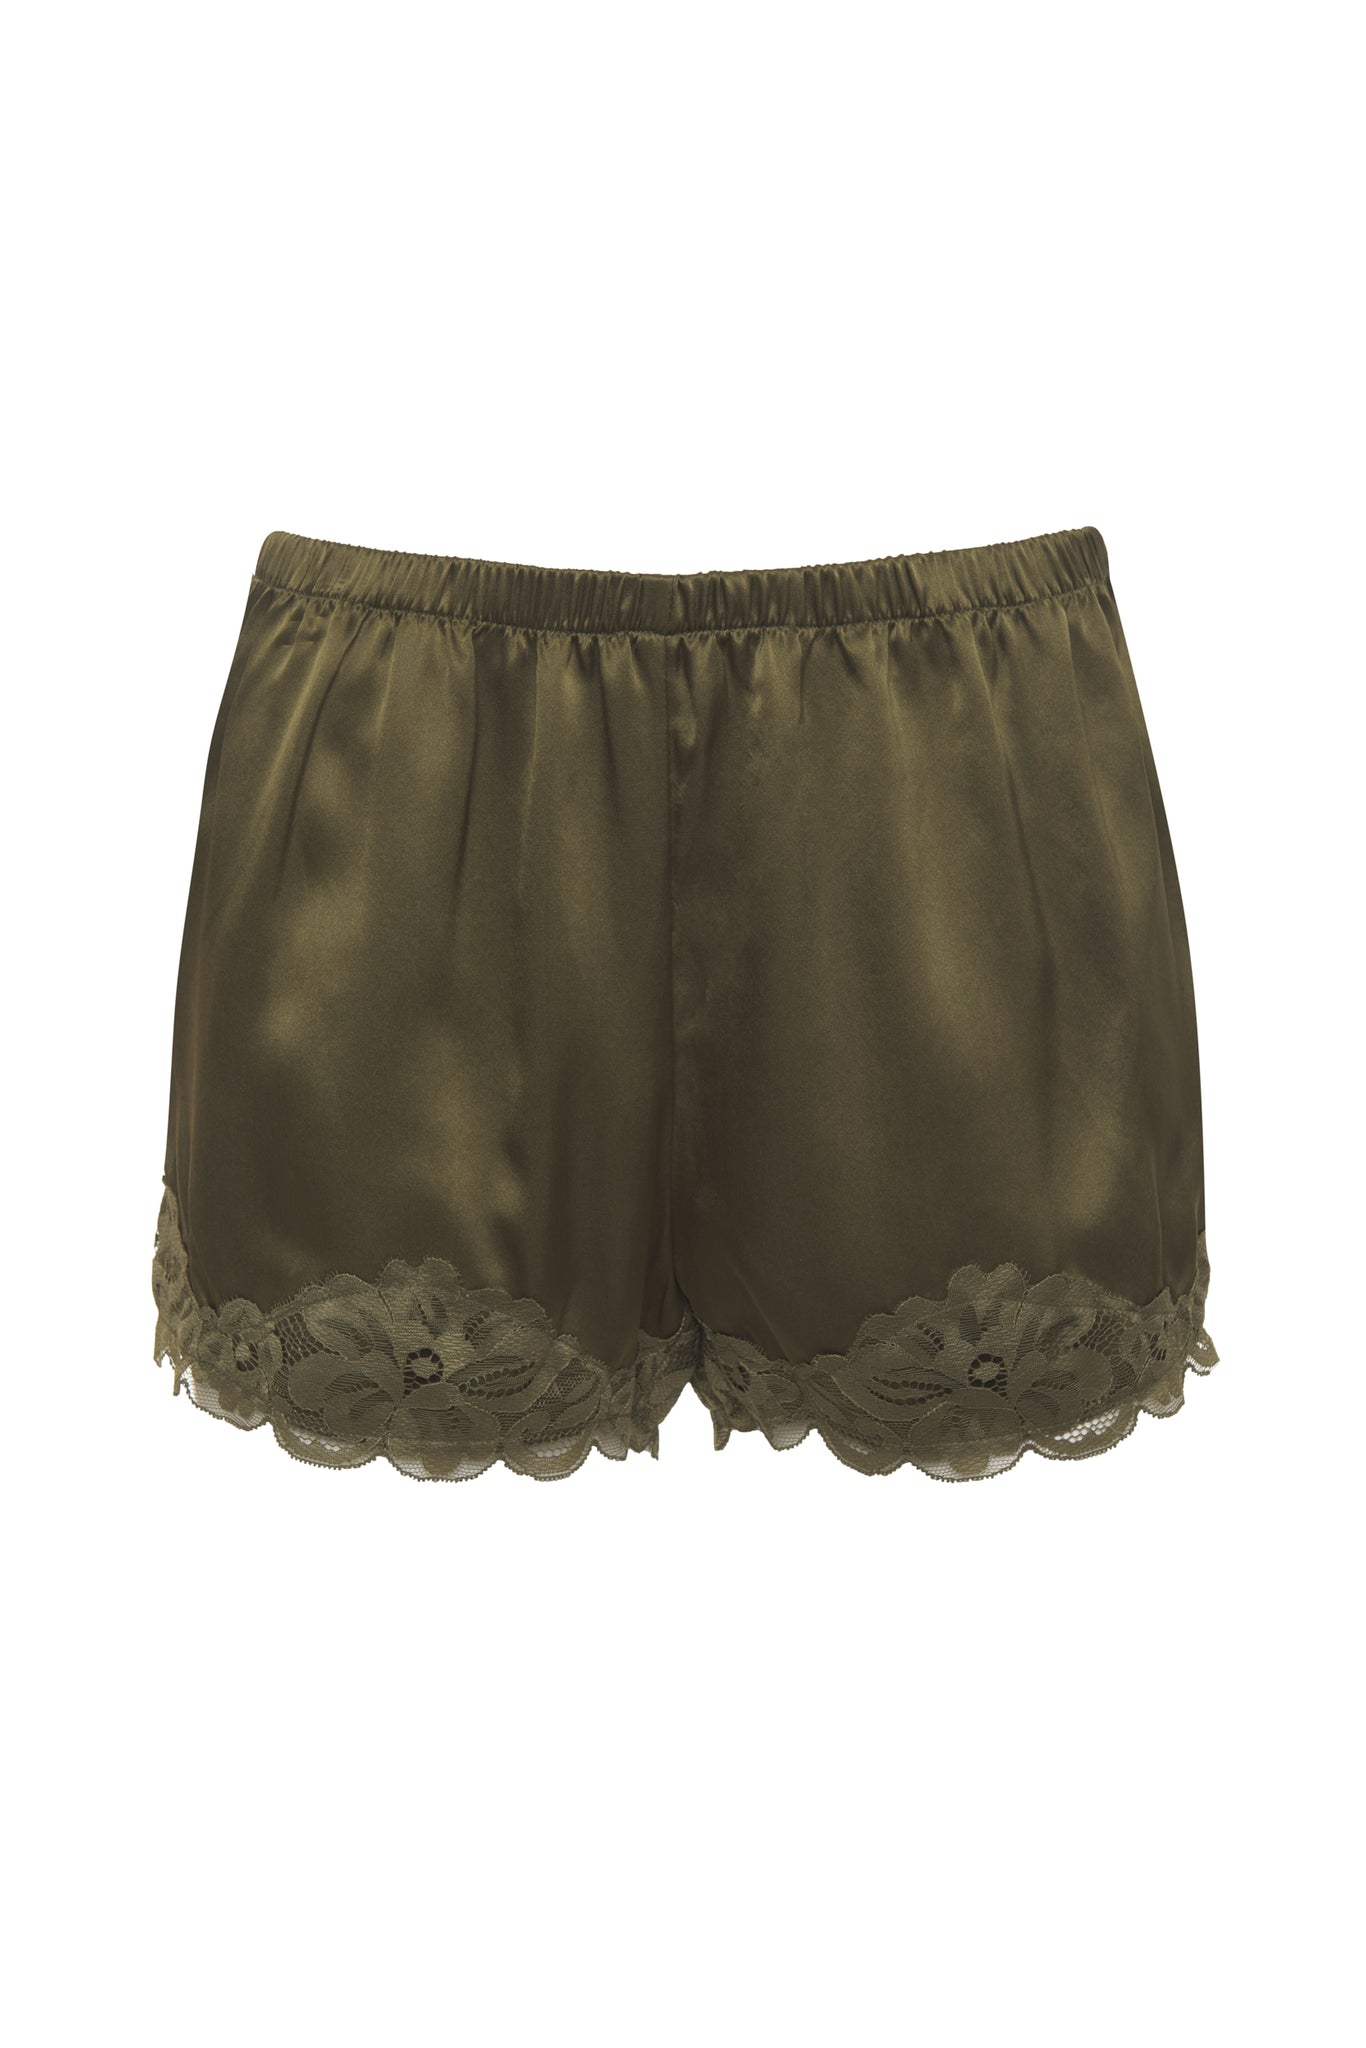 Floral Lace Shorts in Dark Olive